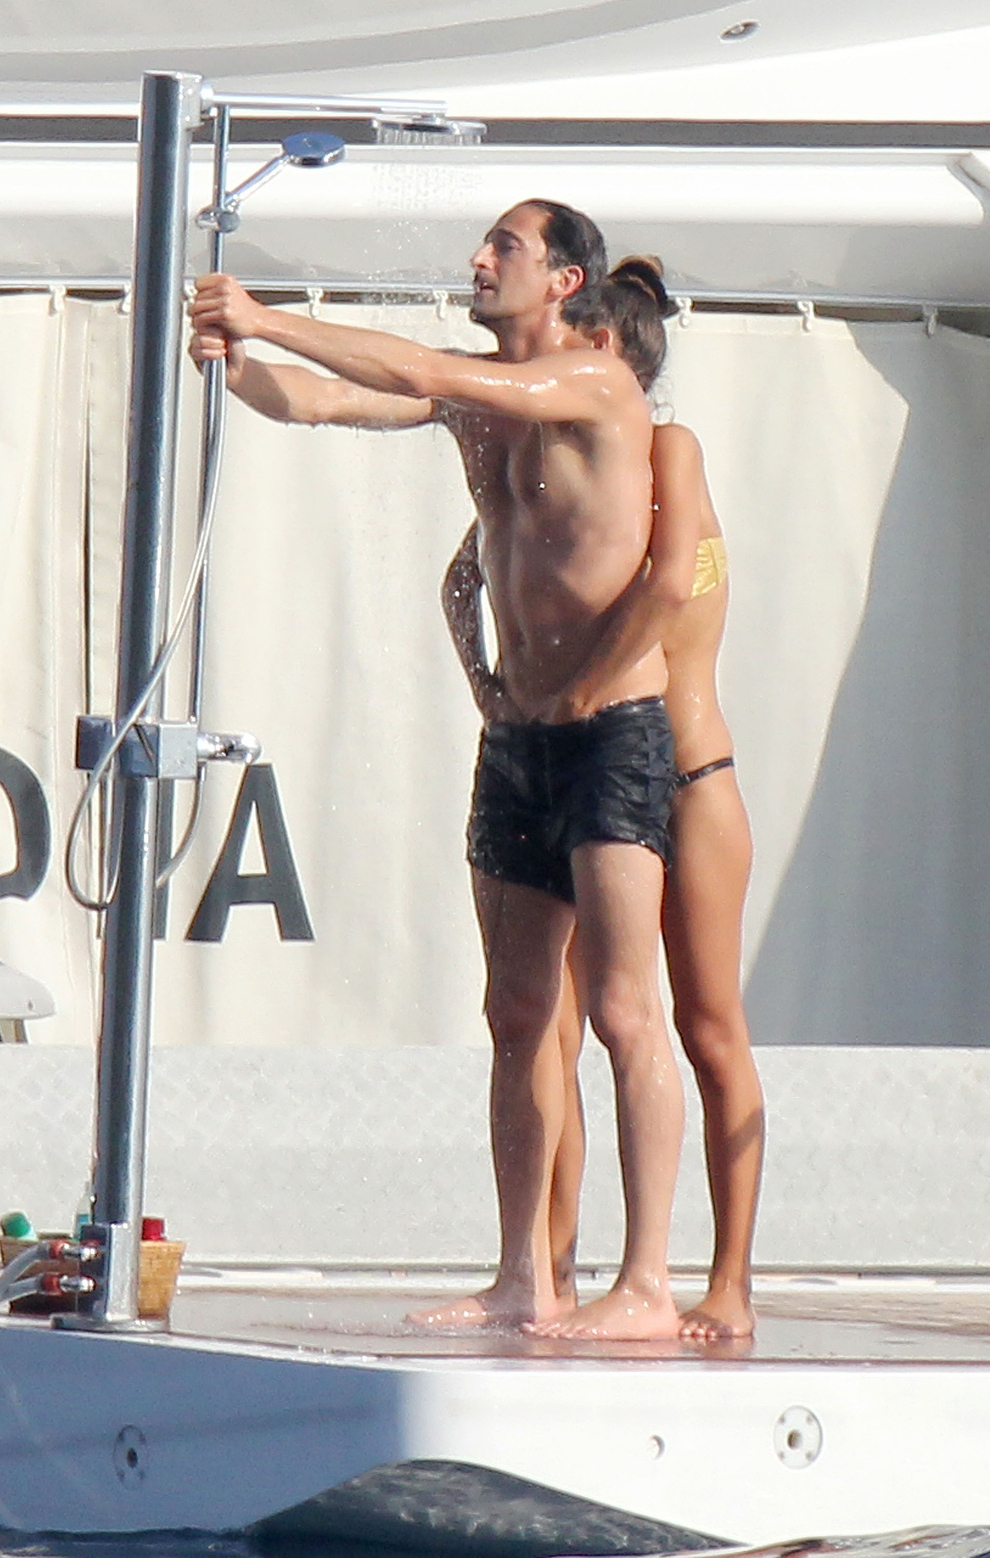 A Lesson In Showering By Adrien Brody